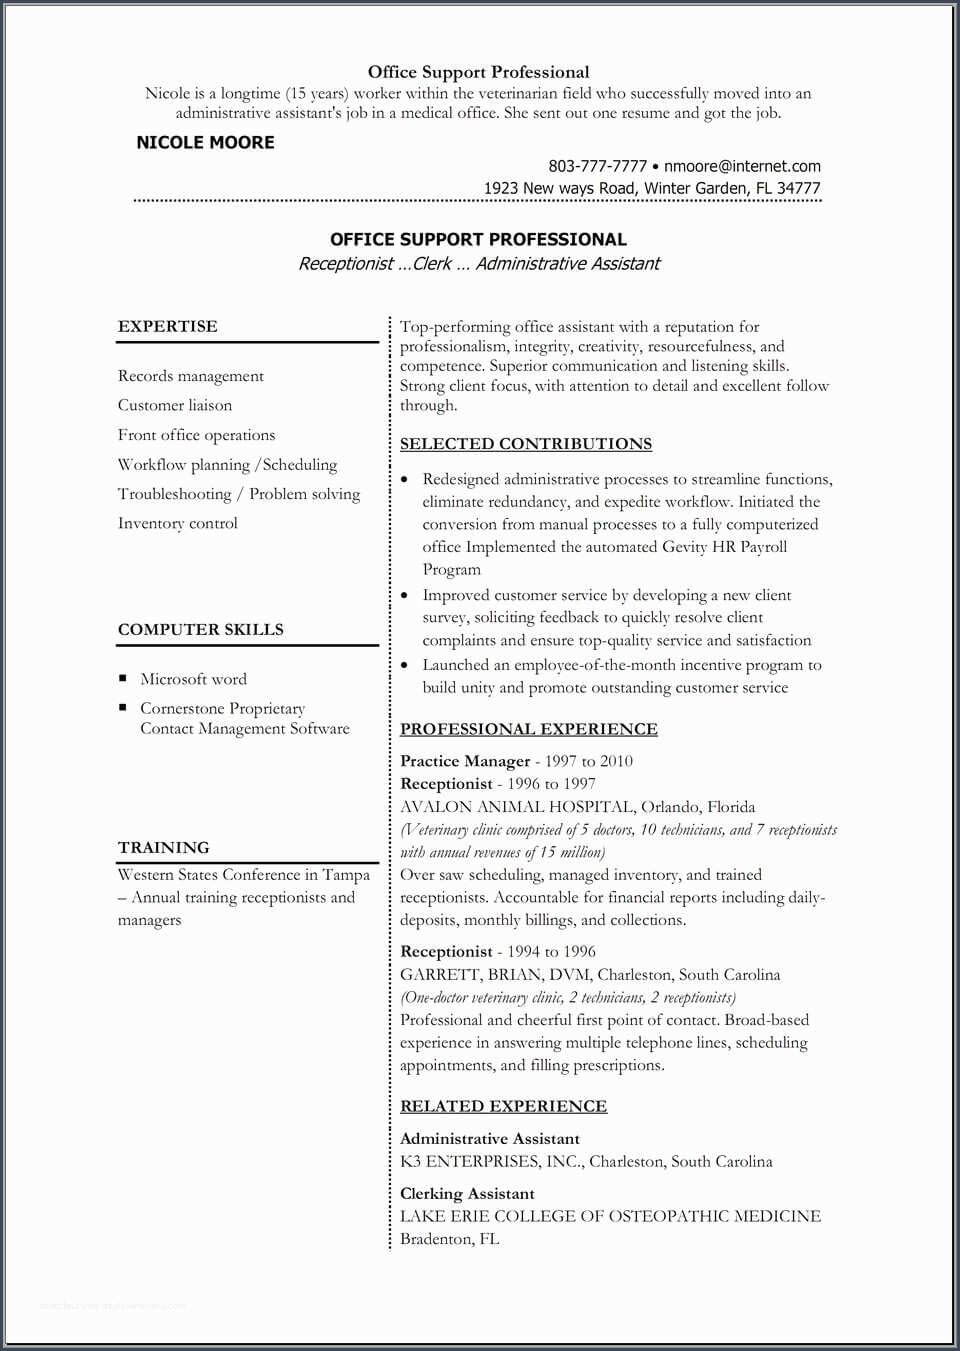 Microsoft Resume Template And Templates Word 2010 How To Use Pertaining To Resume Templates Microsoft Word 2010